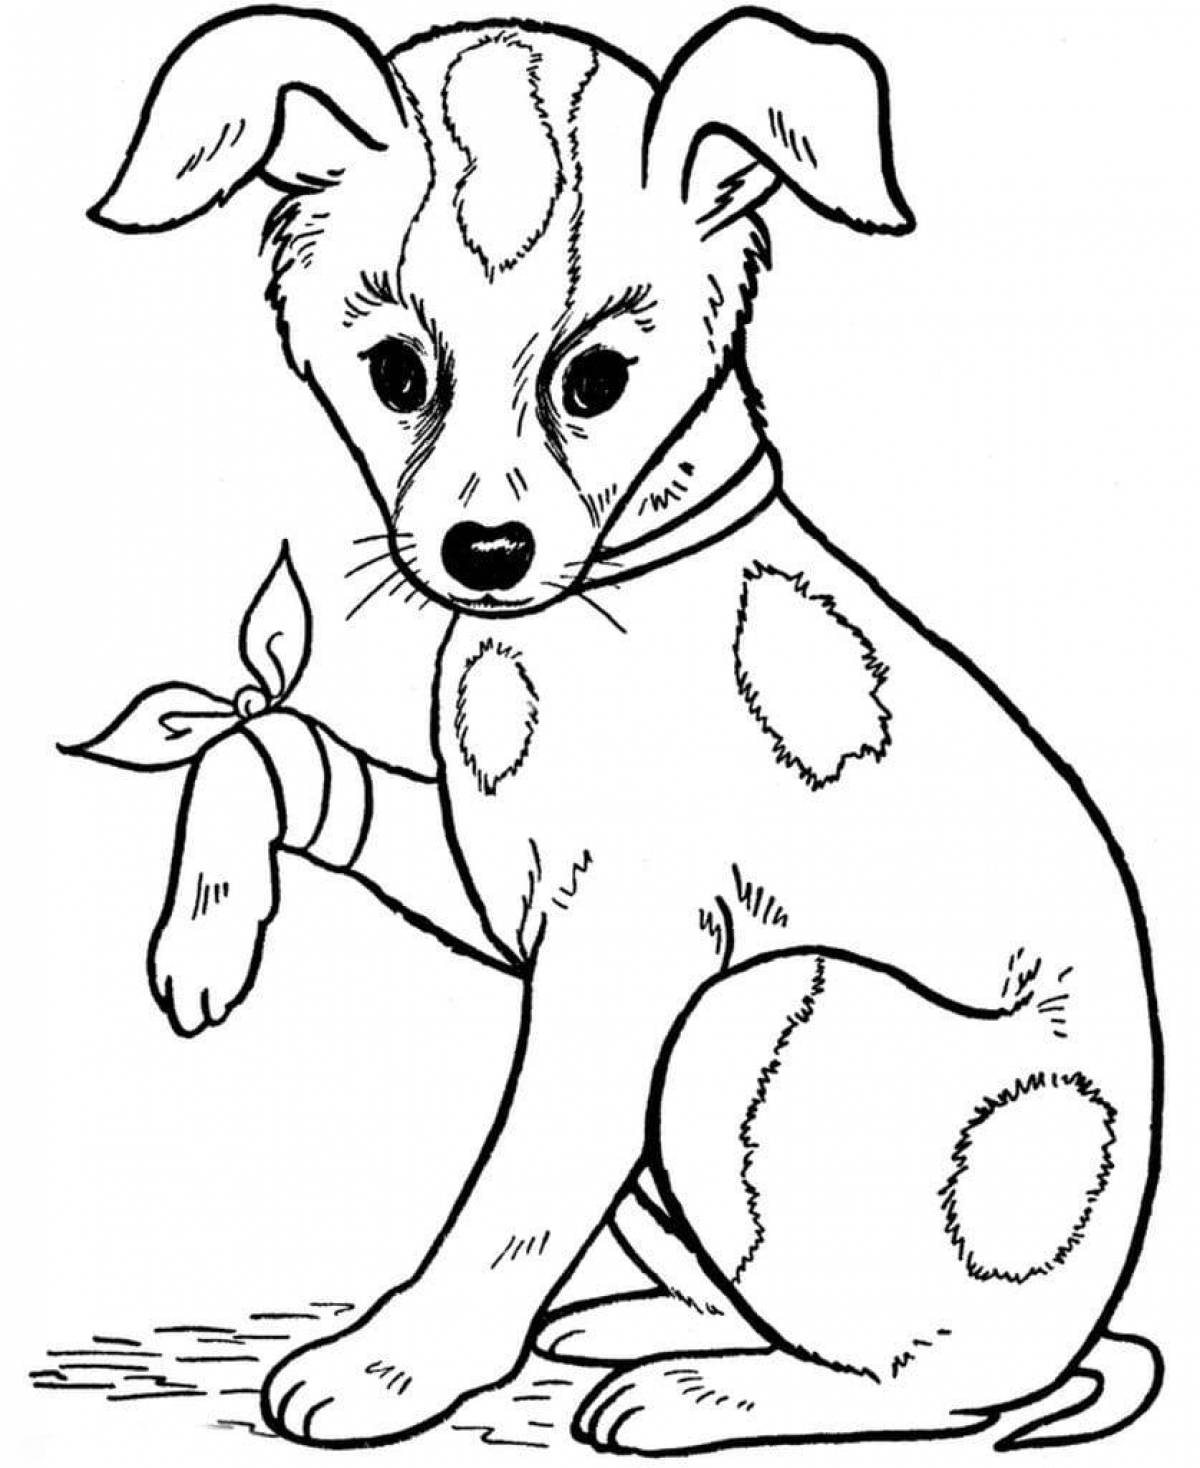 Brave dog coloring book